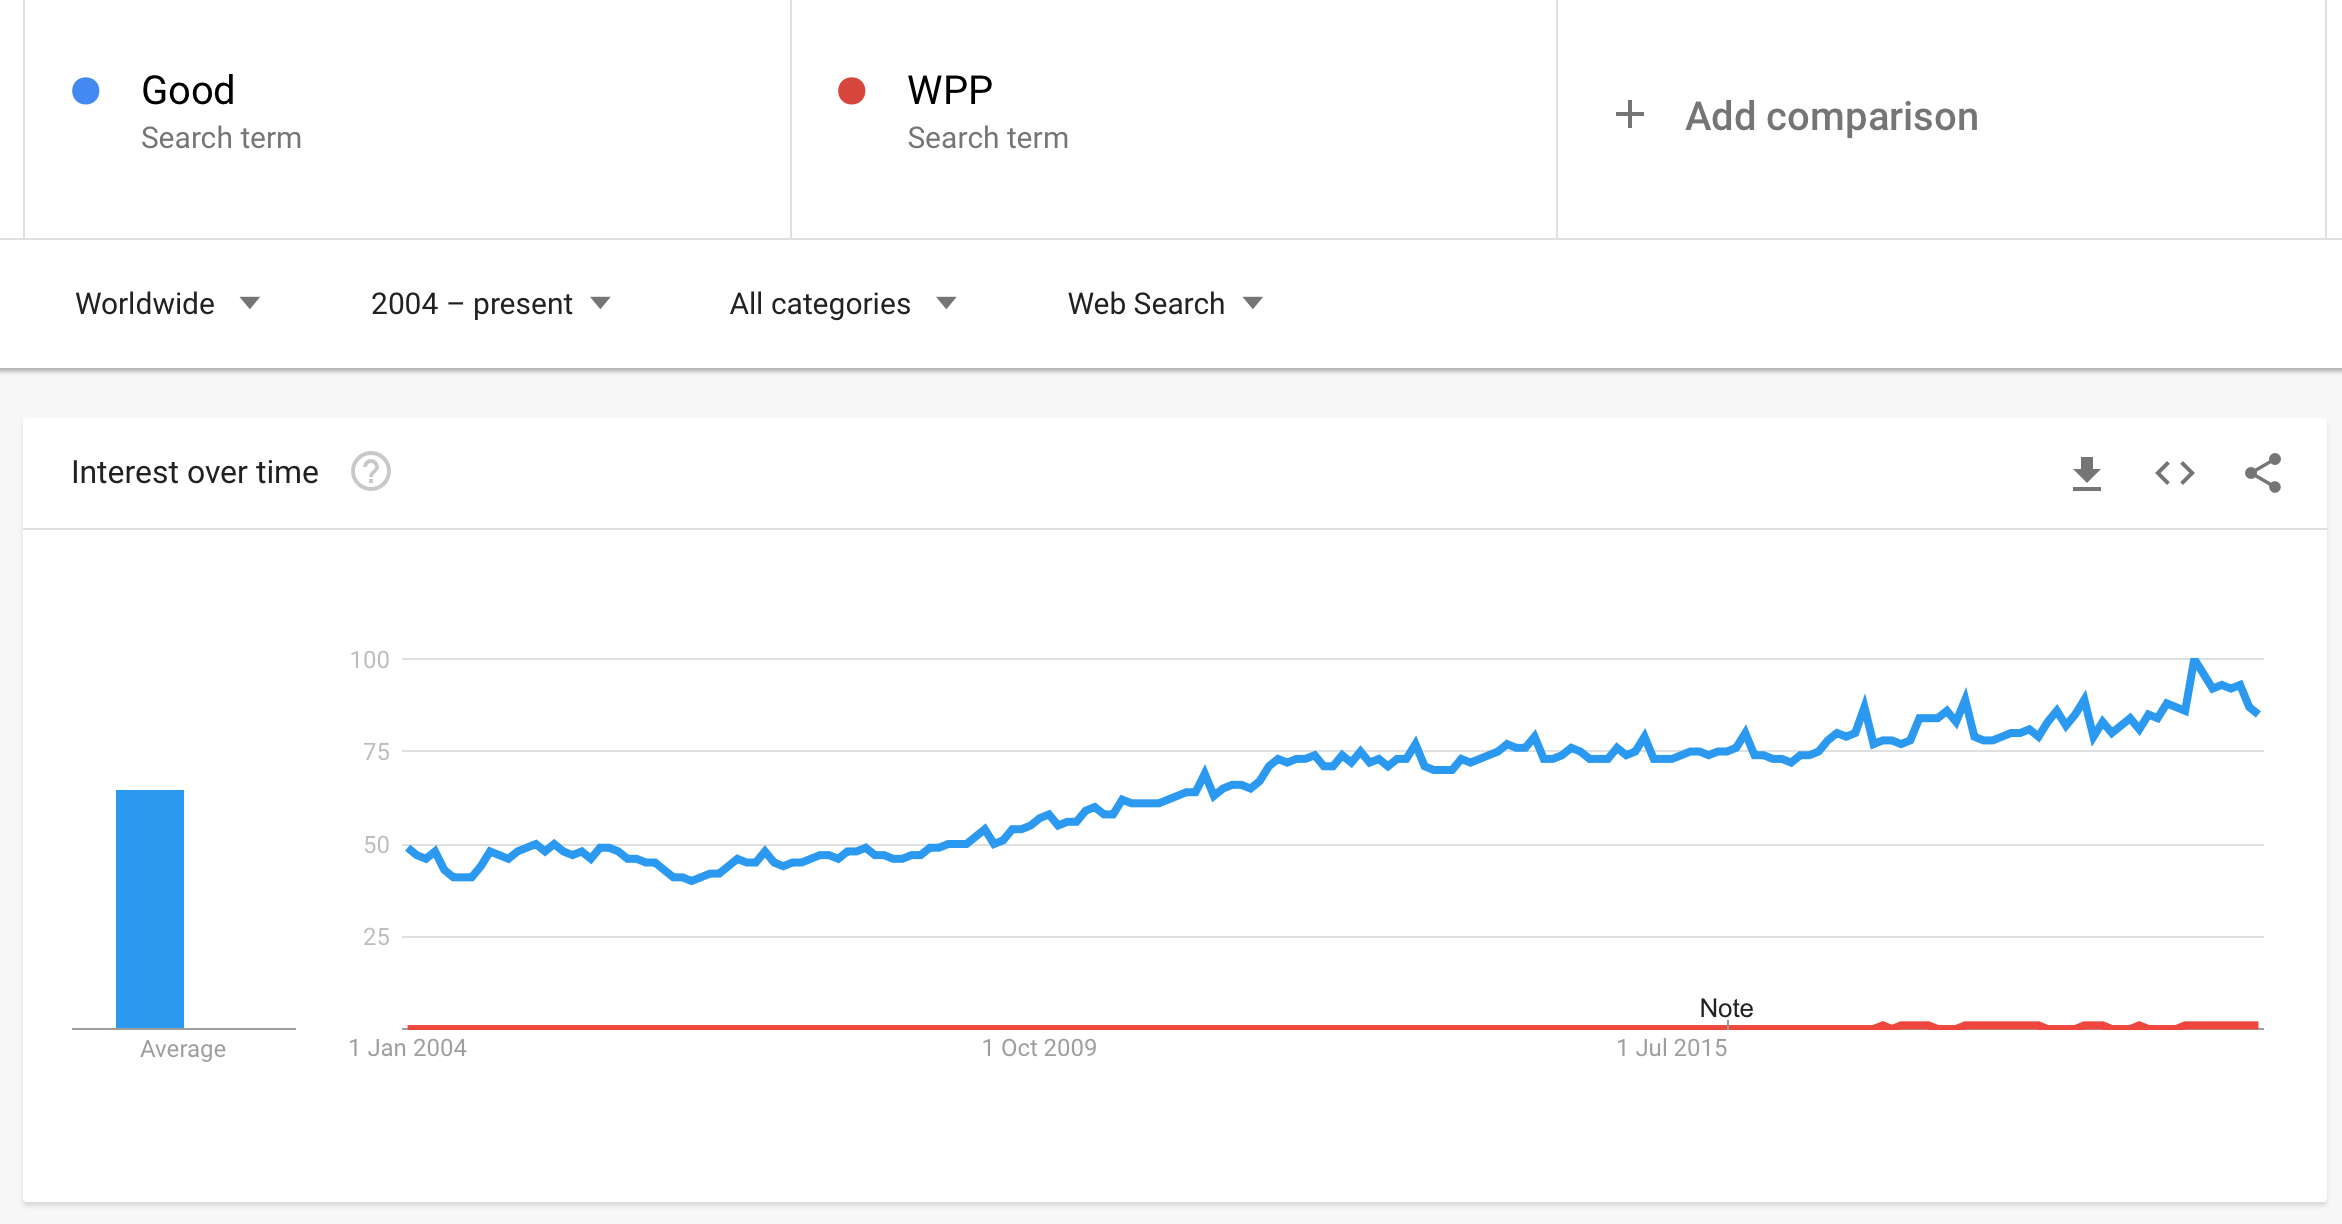 WPP Good Share of Search